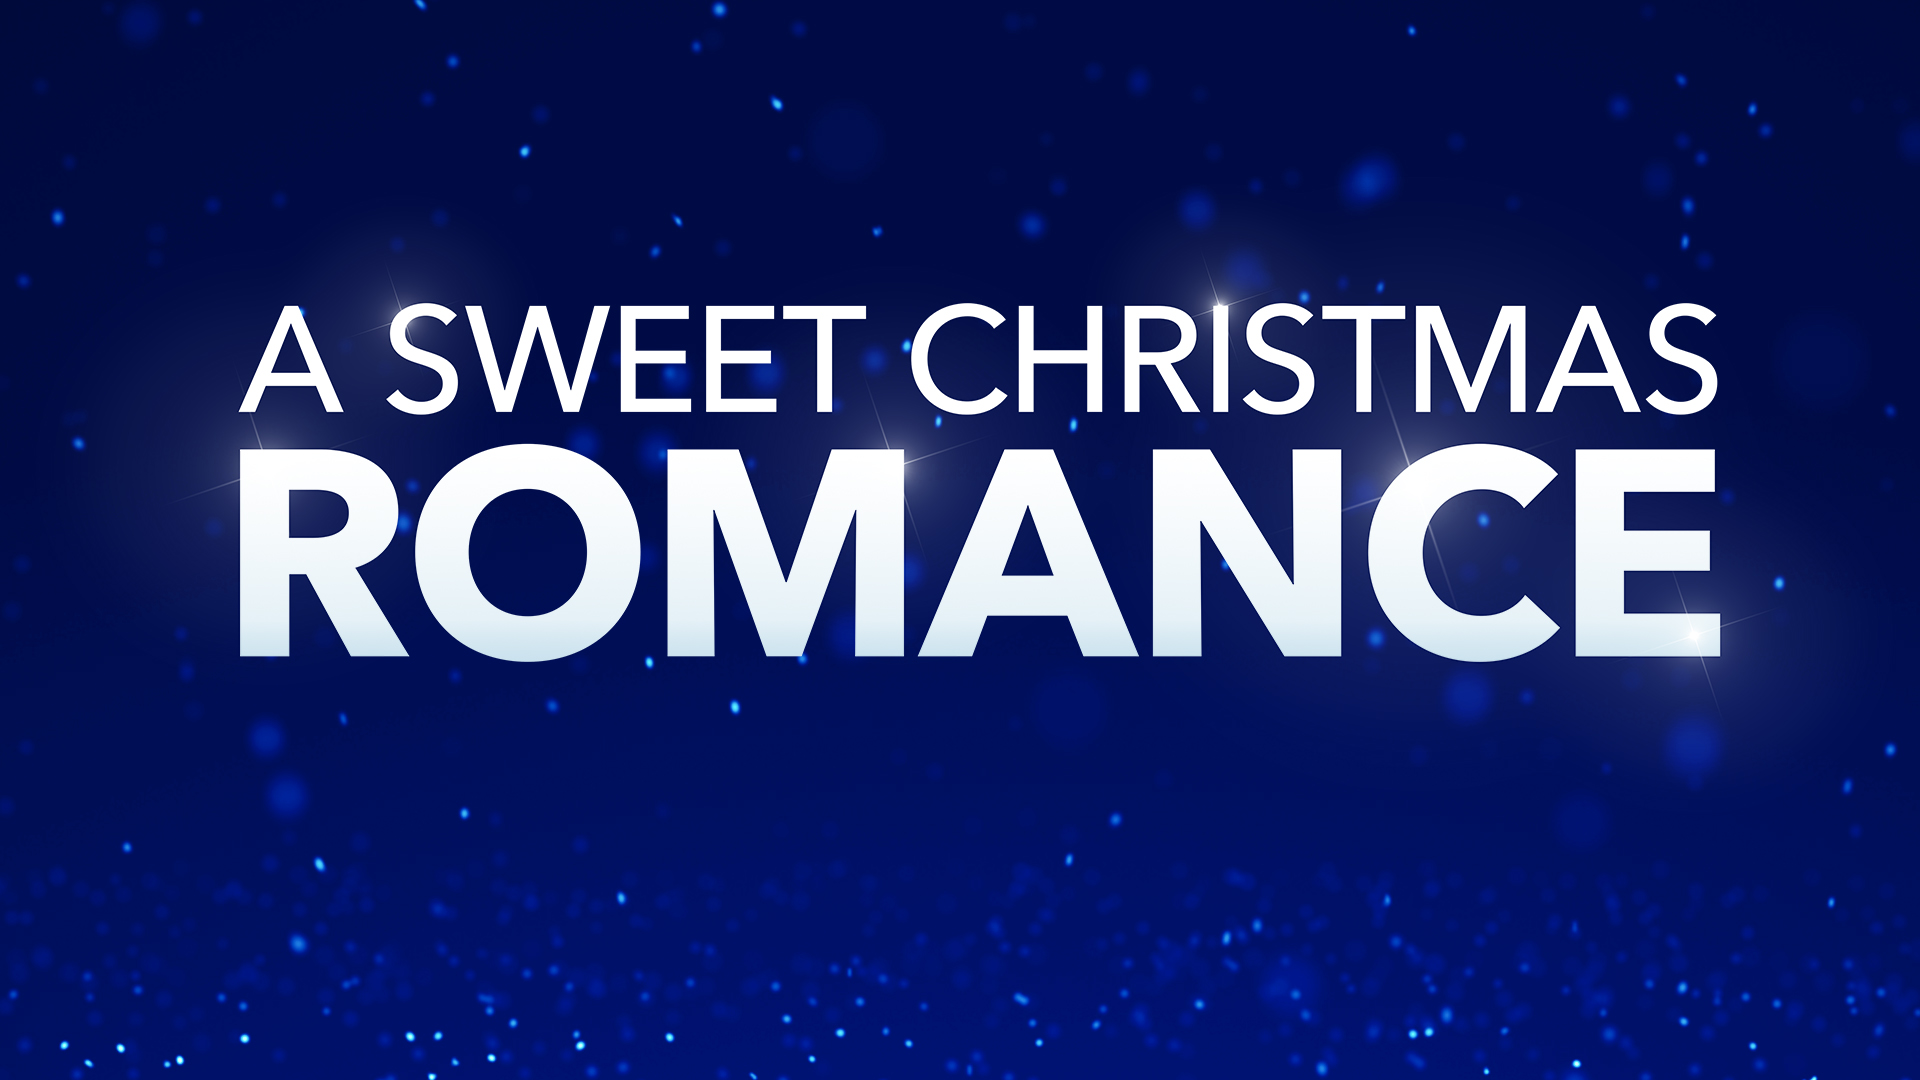 About A Sweet Christmas Romance